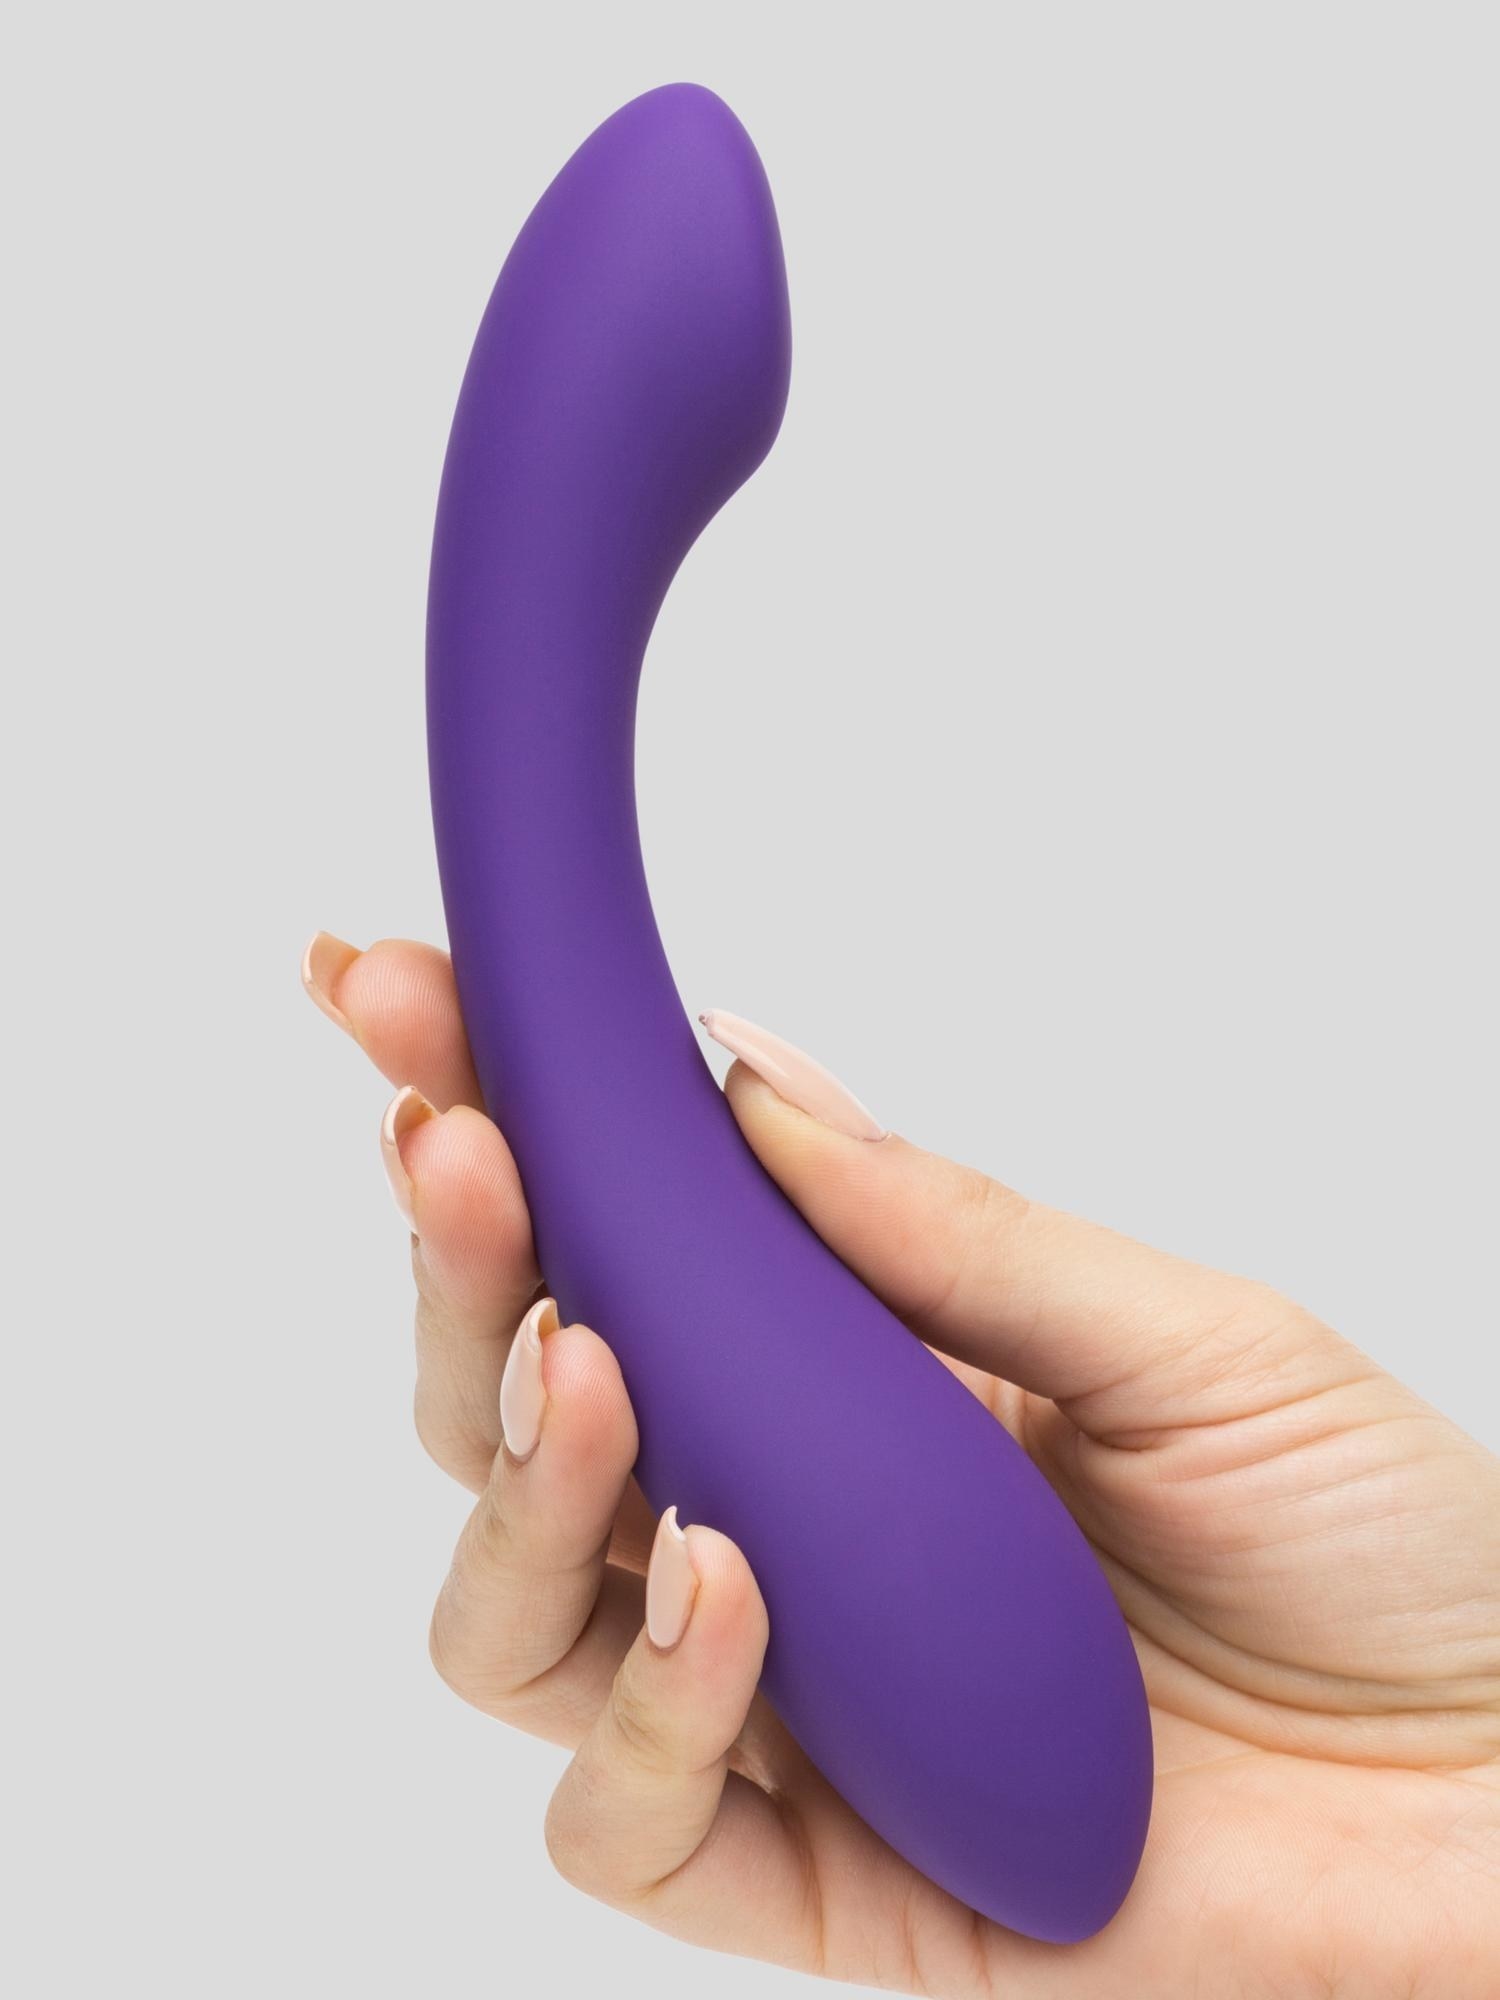 a hand holding the curved purple toy